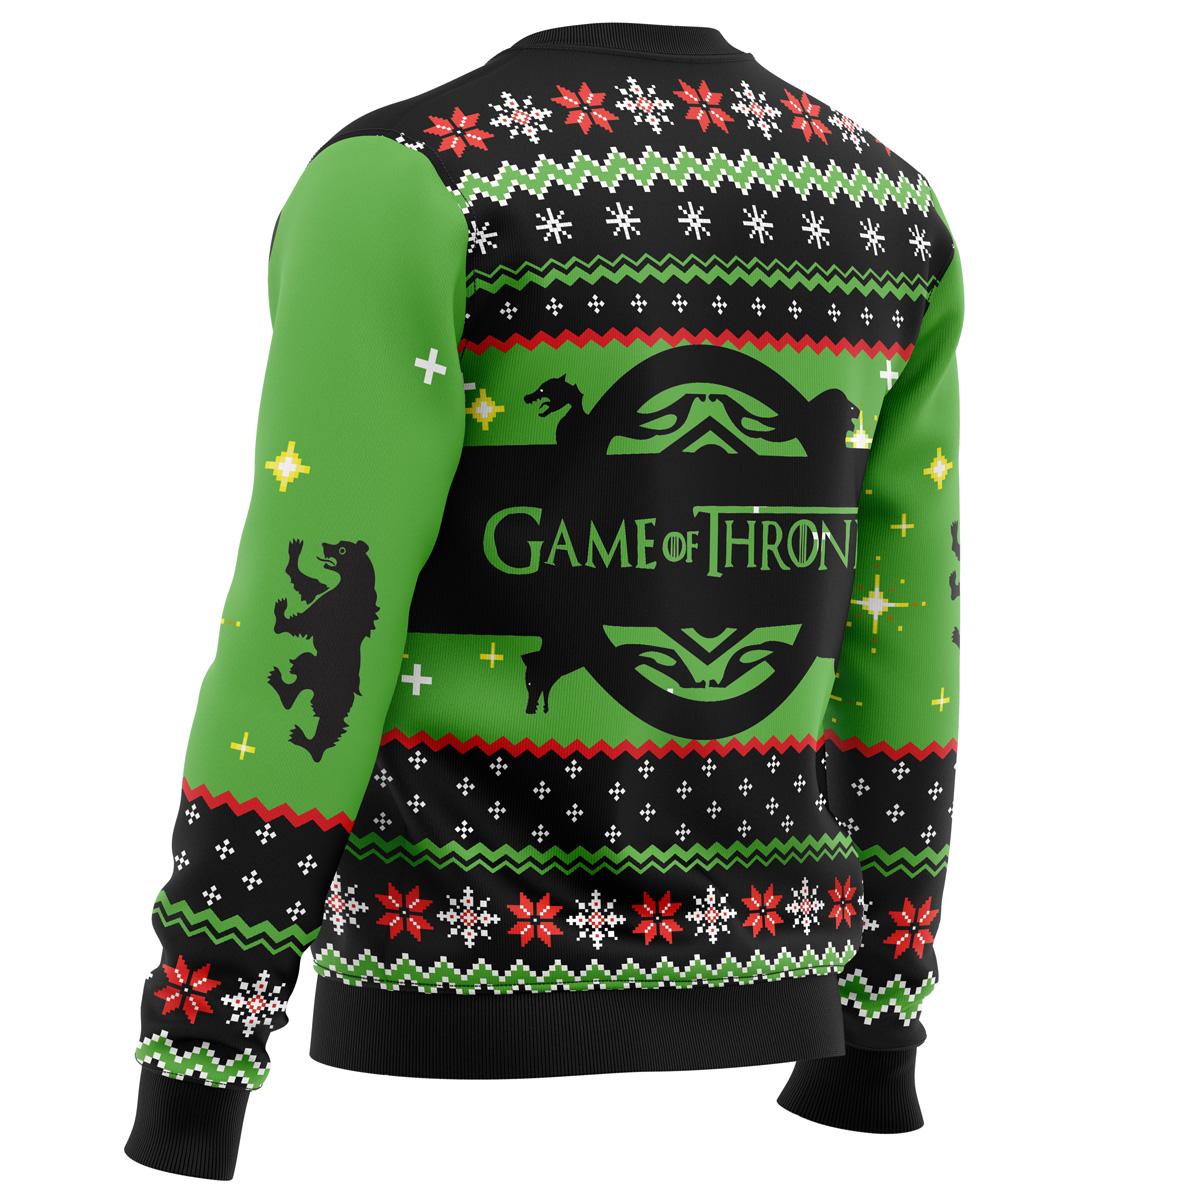 Game of Thrones House Mormont Ugly Sweater